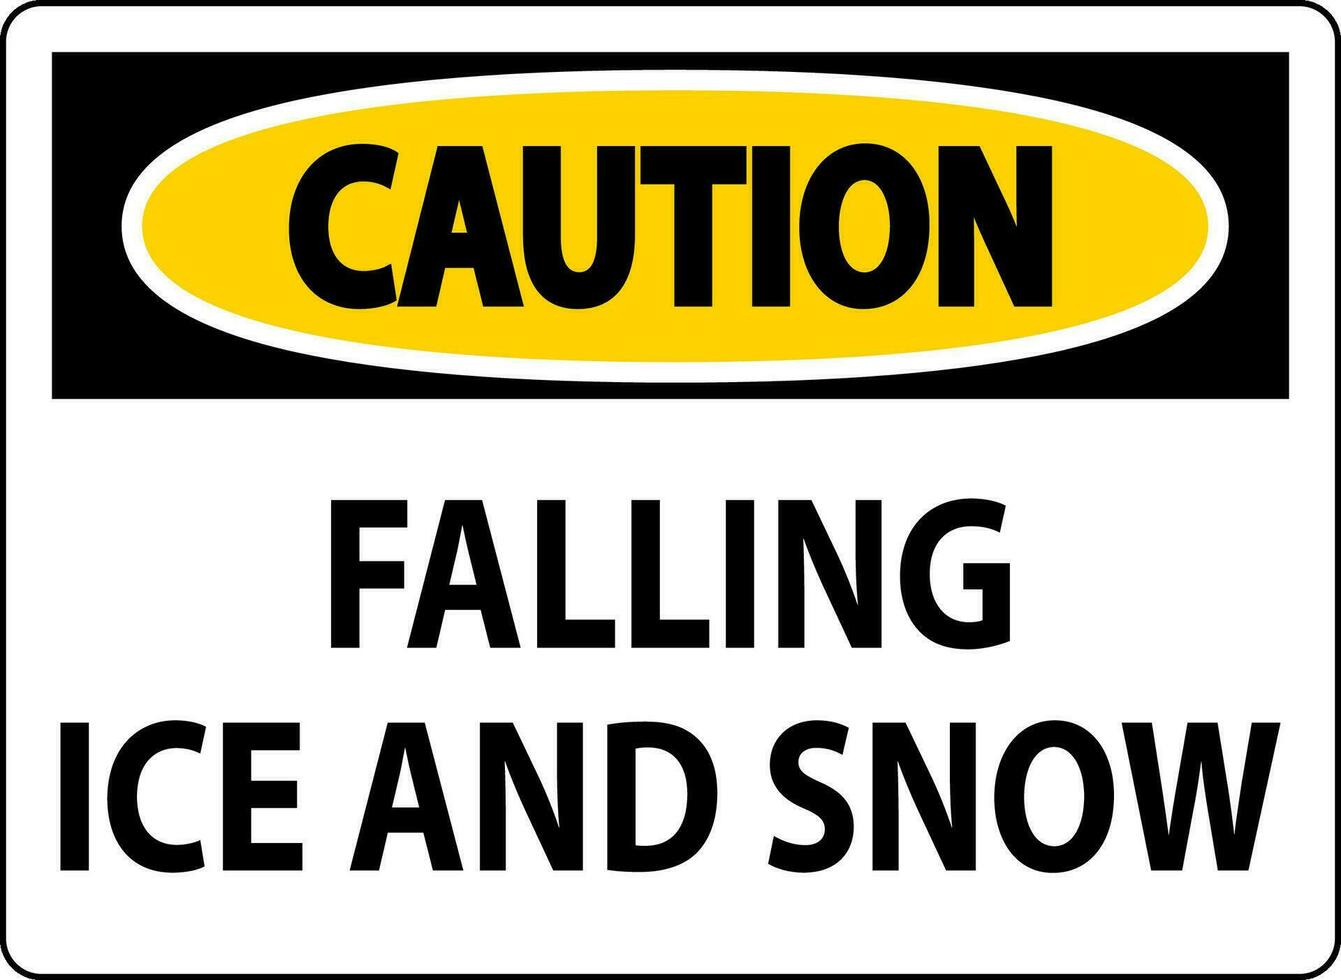 Caution Sign Falling Ice And Snow vector